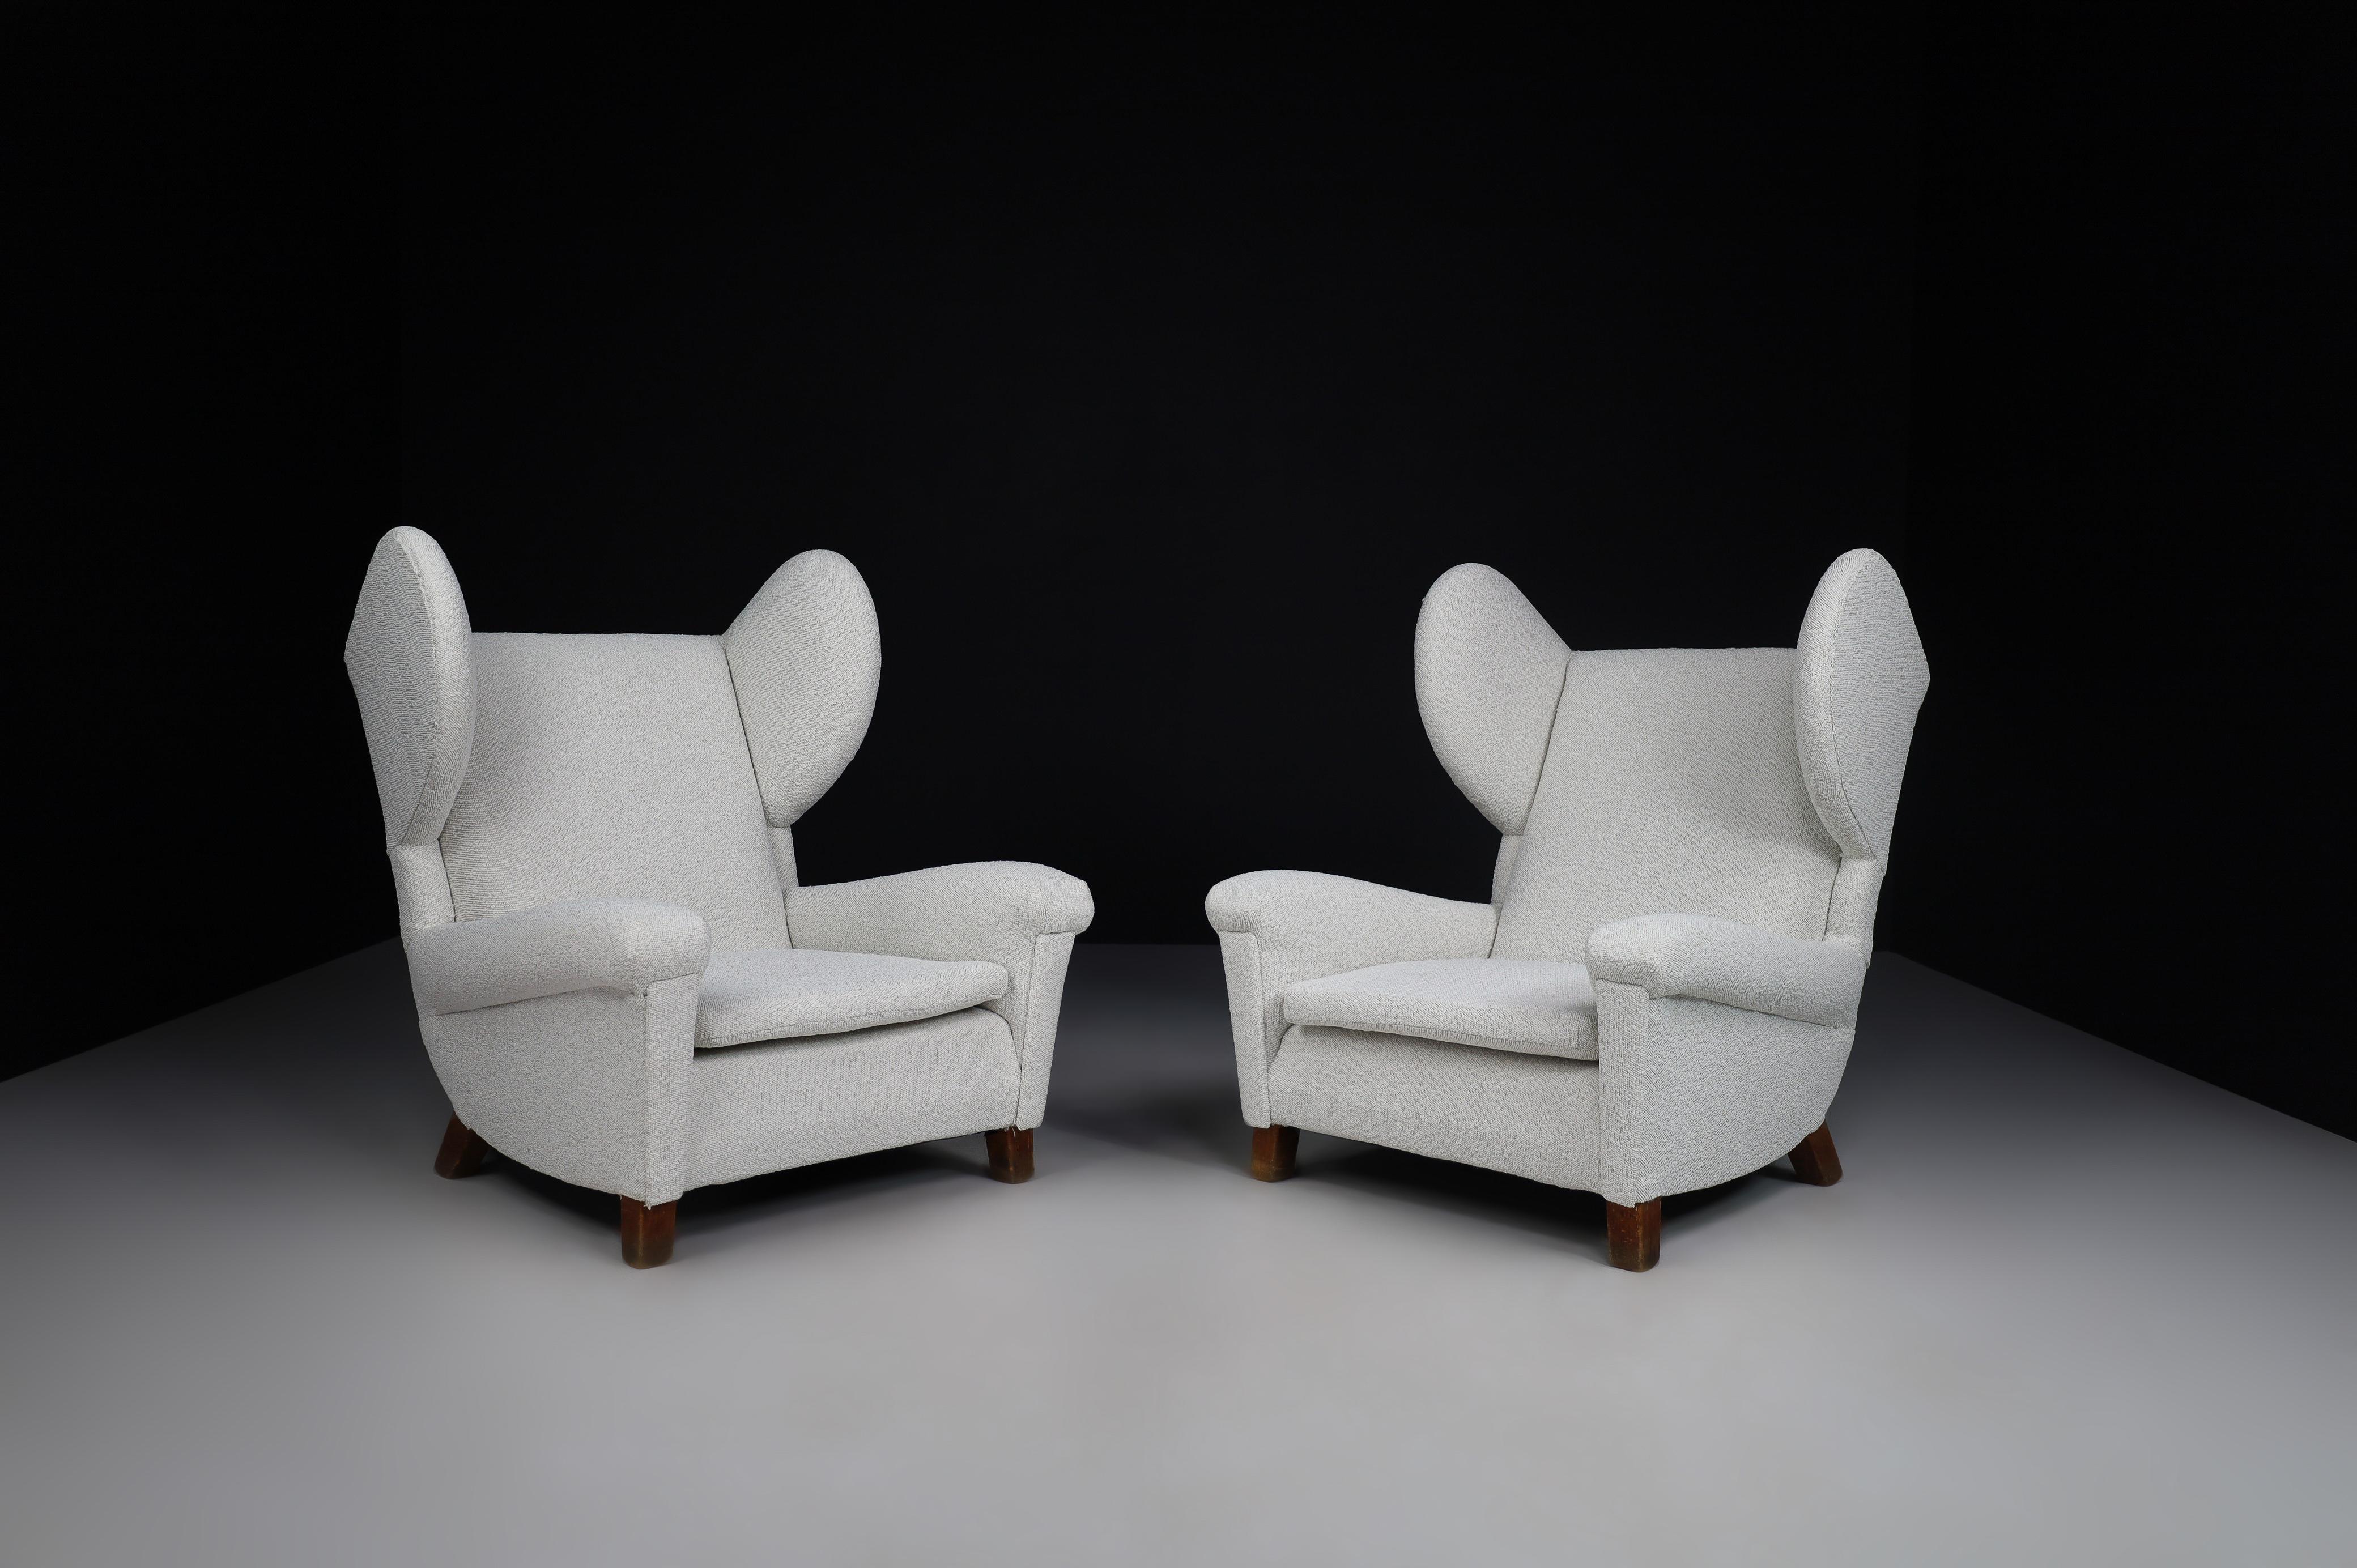 Large monumental midcentury wingback armchairs in re-upholstered bouclé fabric, France 1950s. These armchairs would be an eye-catching addition to any interior, such as a living room, family room, screening room or office. It also perfectly fits in